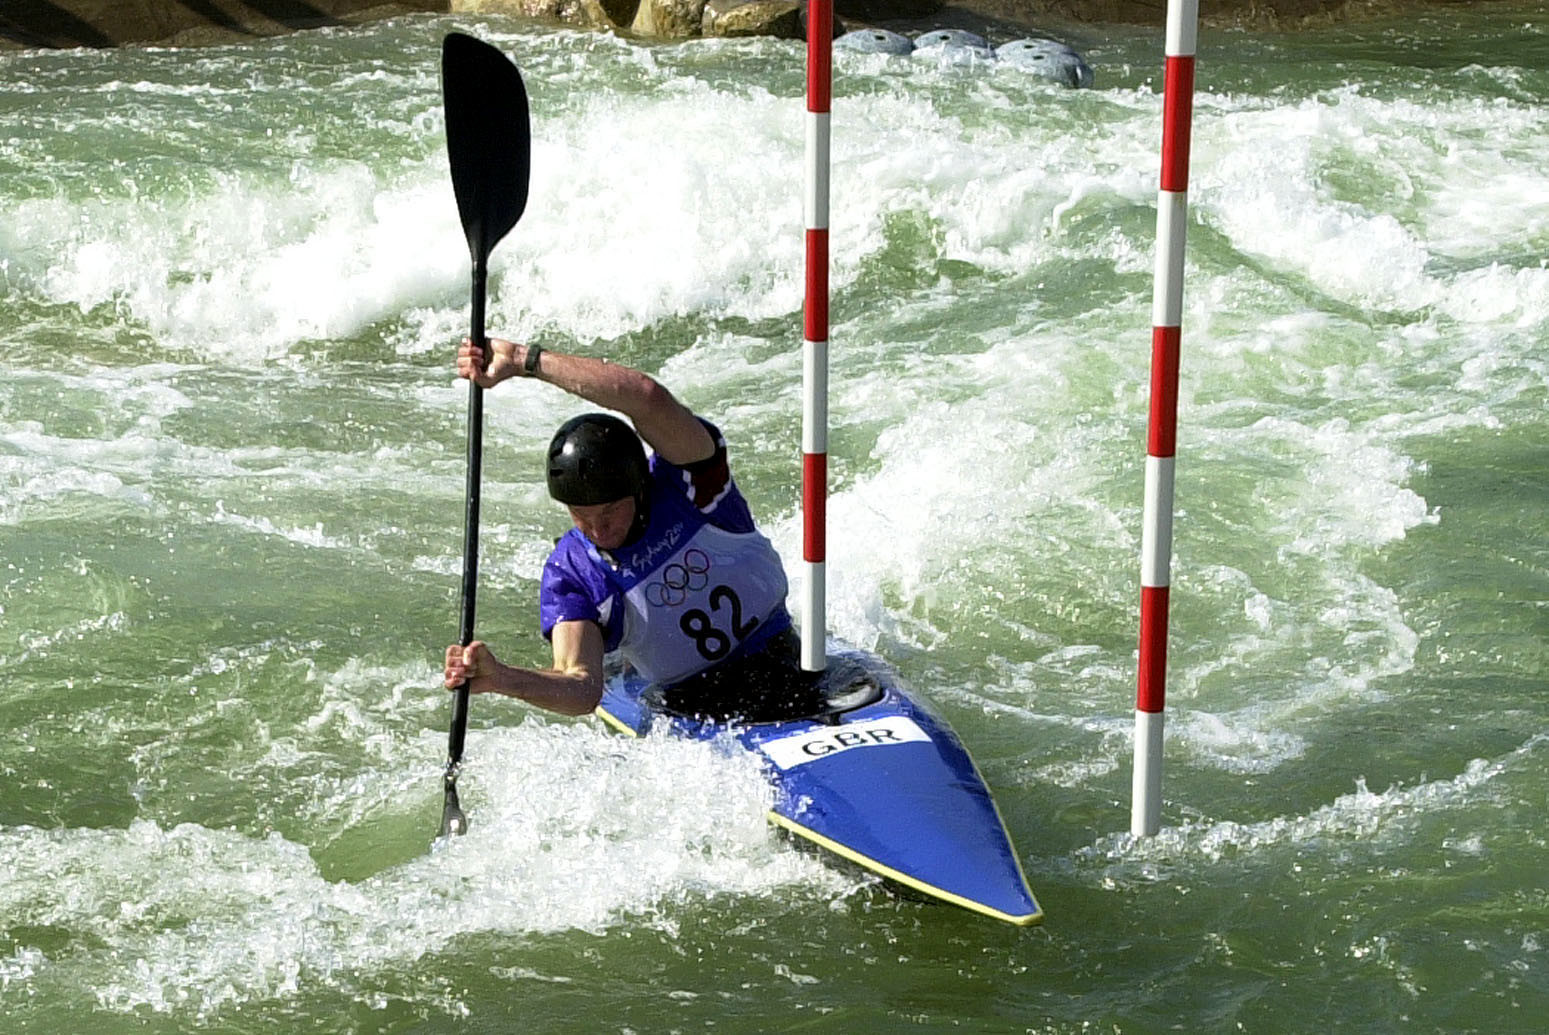 Penrith Whitewater Stadium hosted the canoe slalom contest at the Sydney 2000 Olympic Games ©Getty Images